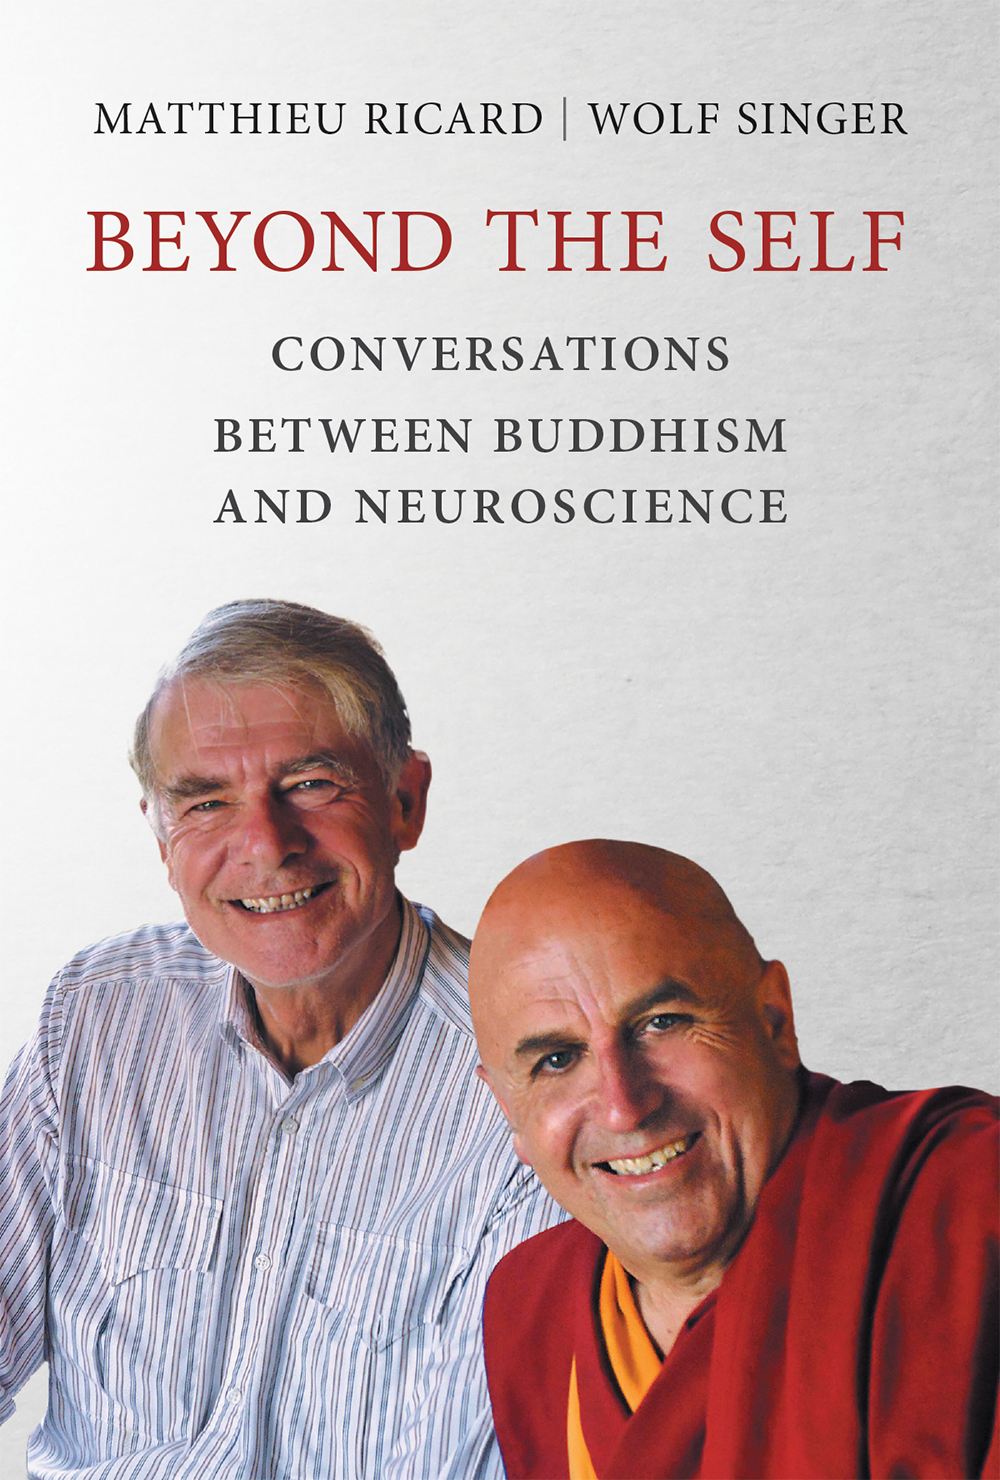 Matthieu Ricard: World's Happiest Man on What Really Matters.